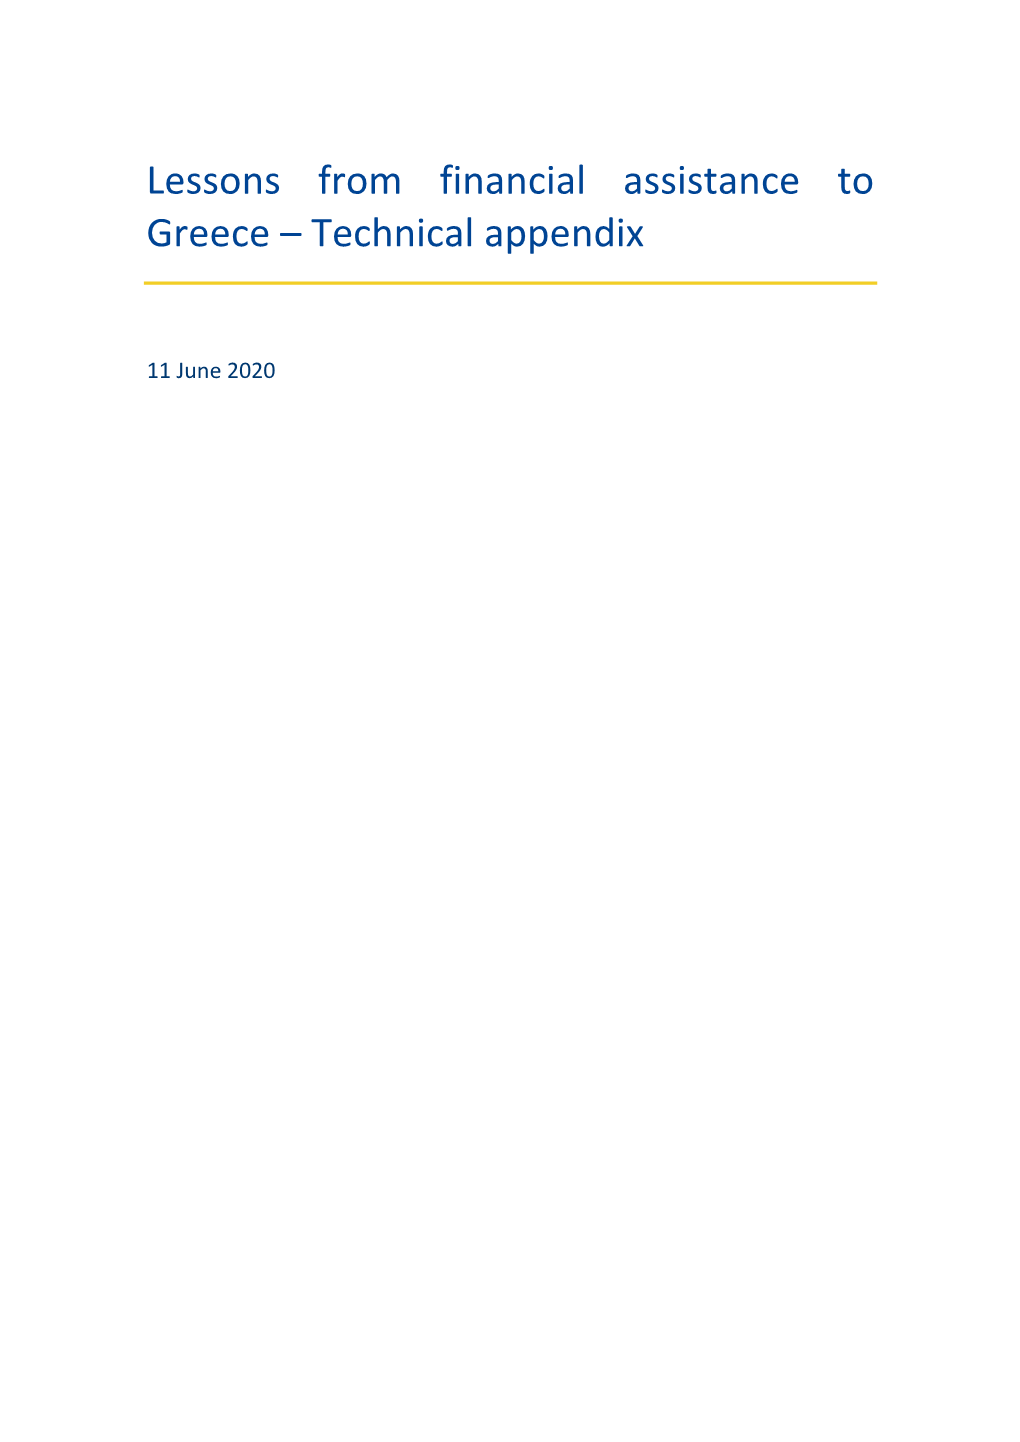 Perception Analysis of the ESM Greek Financial Assistance Programme – a Comparative Study of Online Activity Around Programme Exit